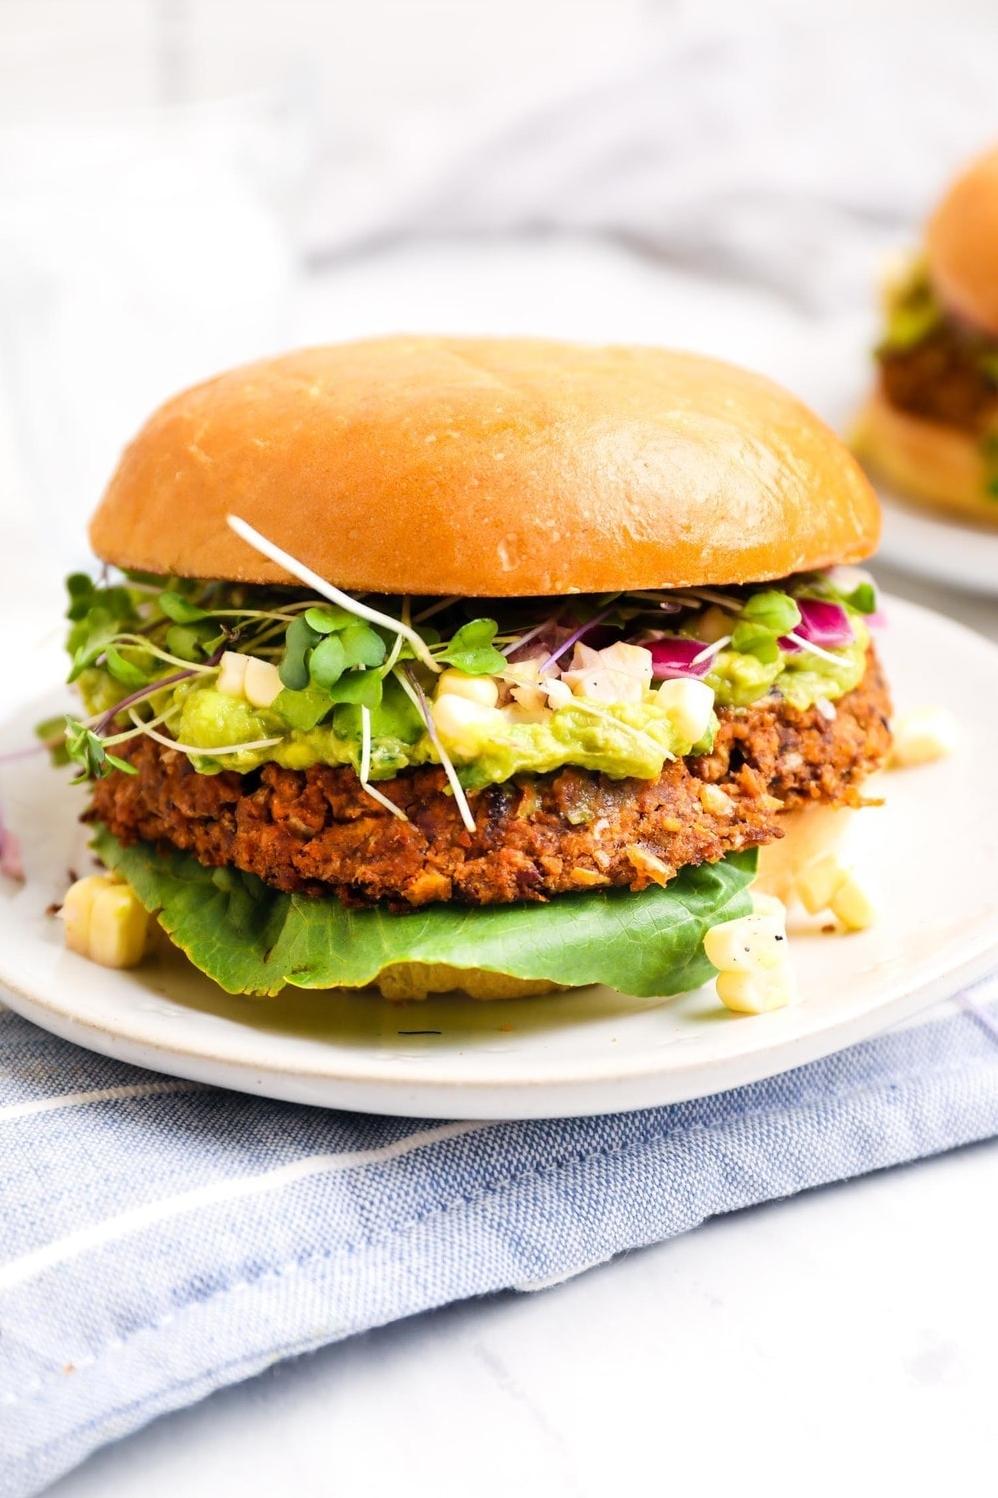  Looking for a fun, healthy way to enjoy a Southern classic? Try our veggie burgers!